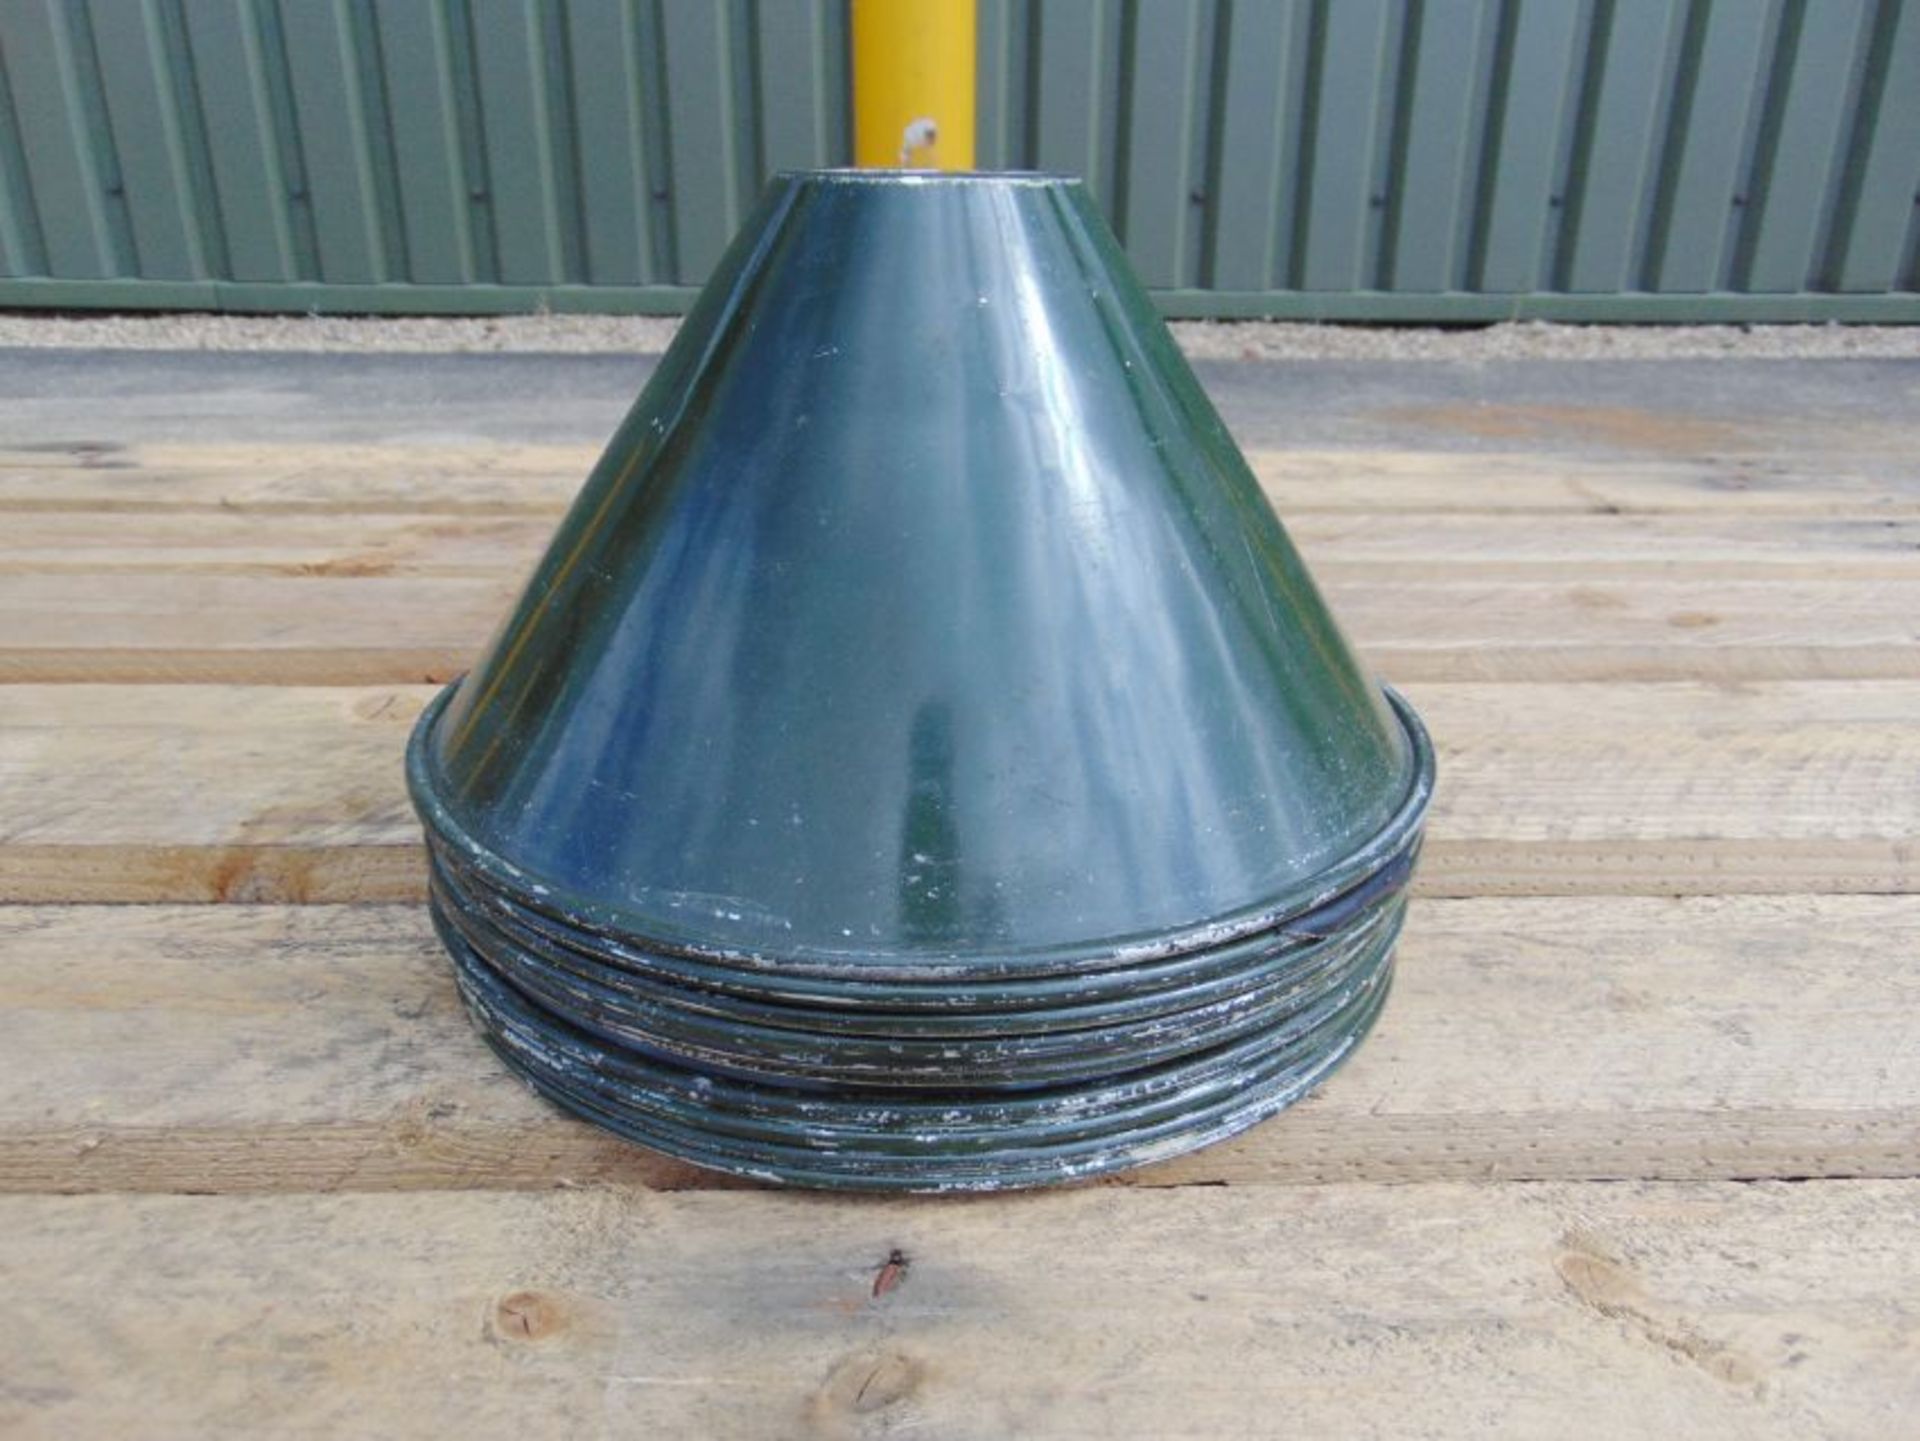 10 x Vintage Classic Military/Industrial Cone Style Pendant Light Shades - Image 3 of 3